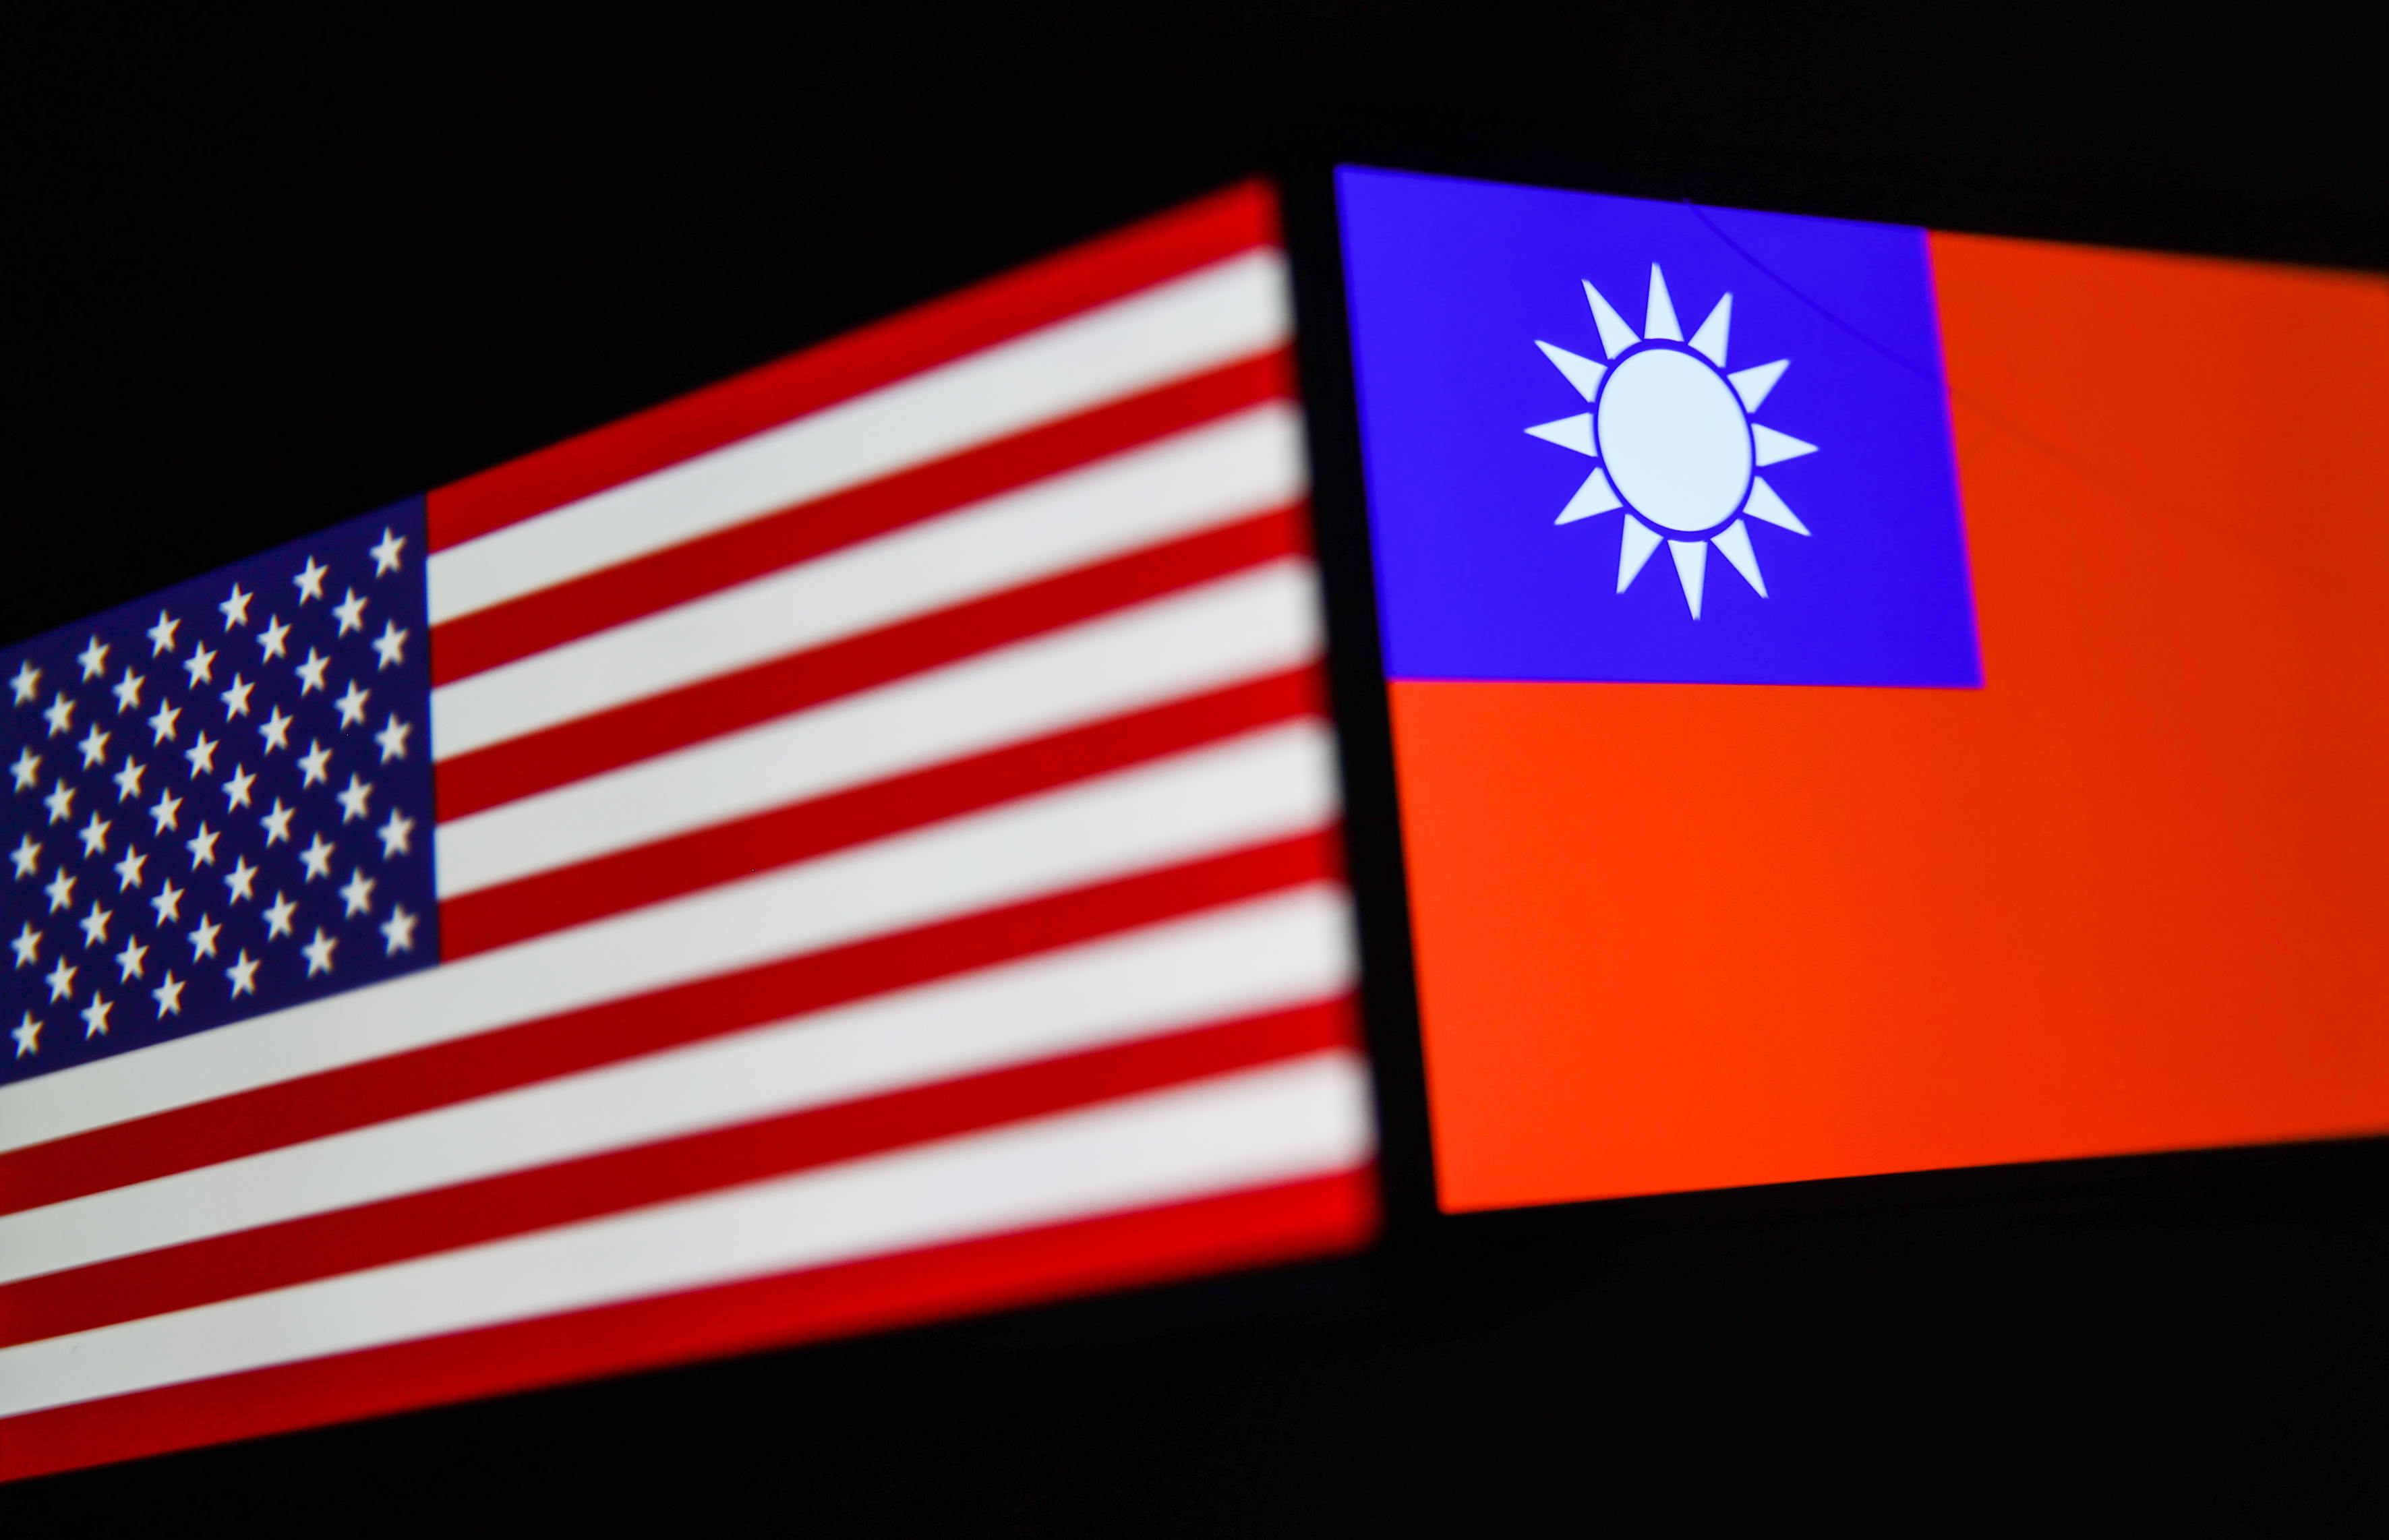 Taiwan’s leader’s visit to the United States may provoke a “big” reaction from China